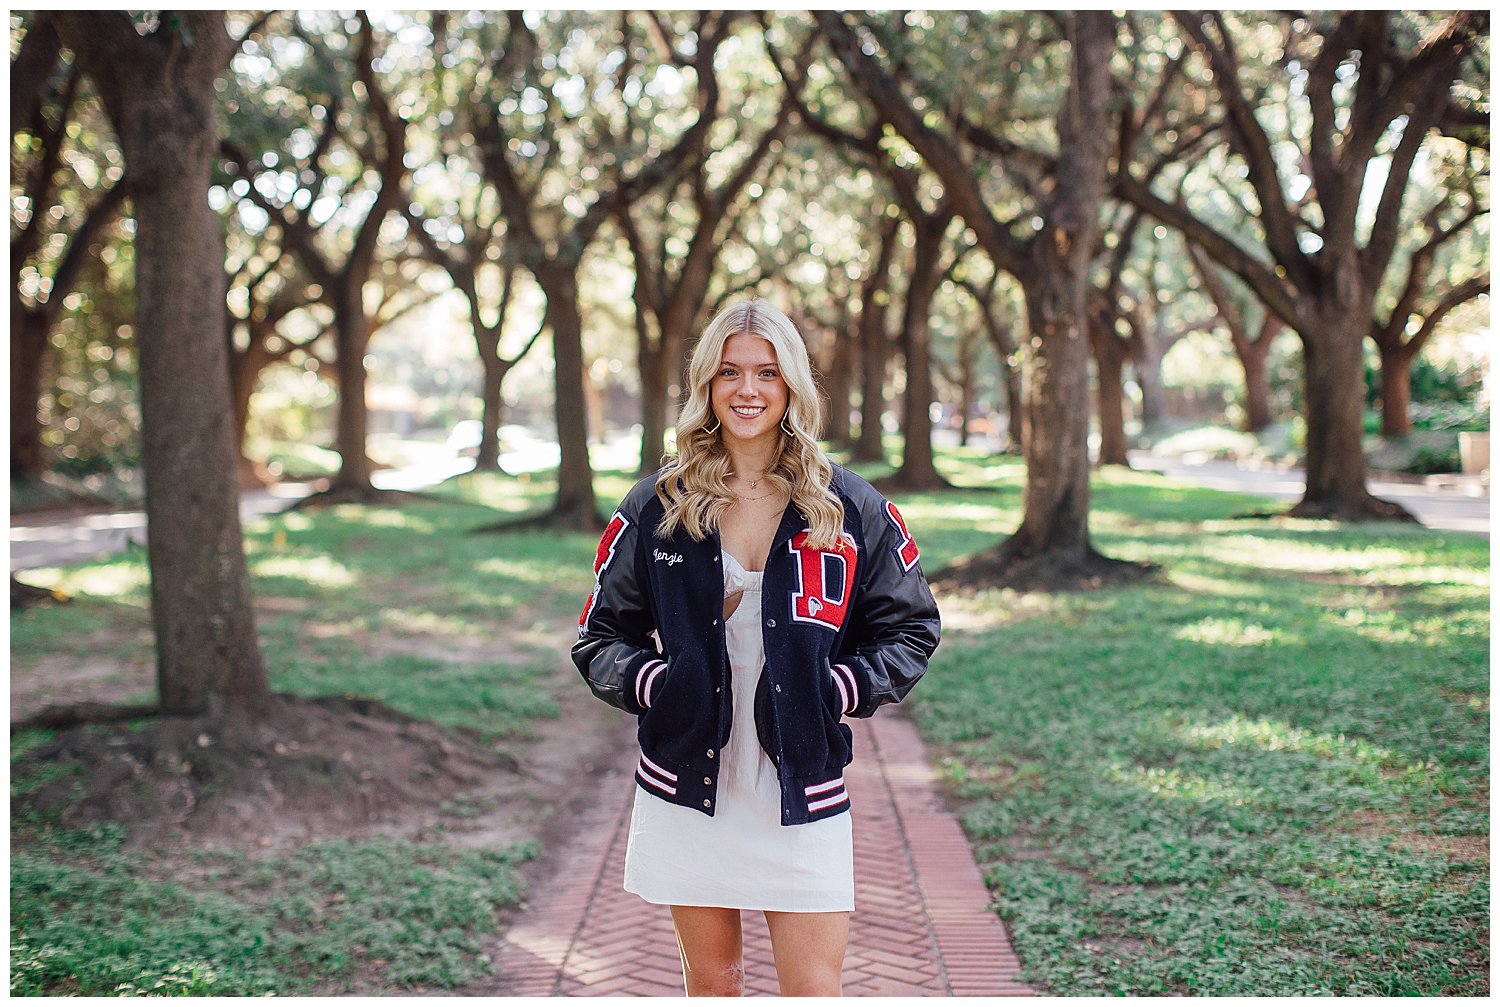 fun senior photos Houston tree line with girl wearing letterman jacket and standing on sidewalk